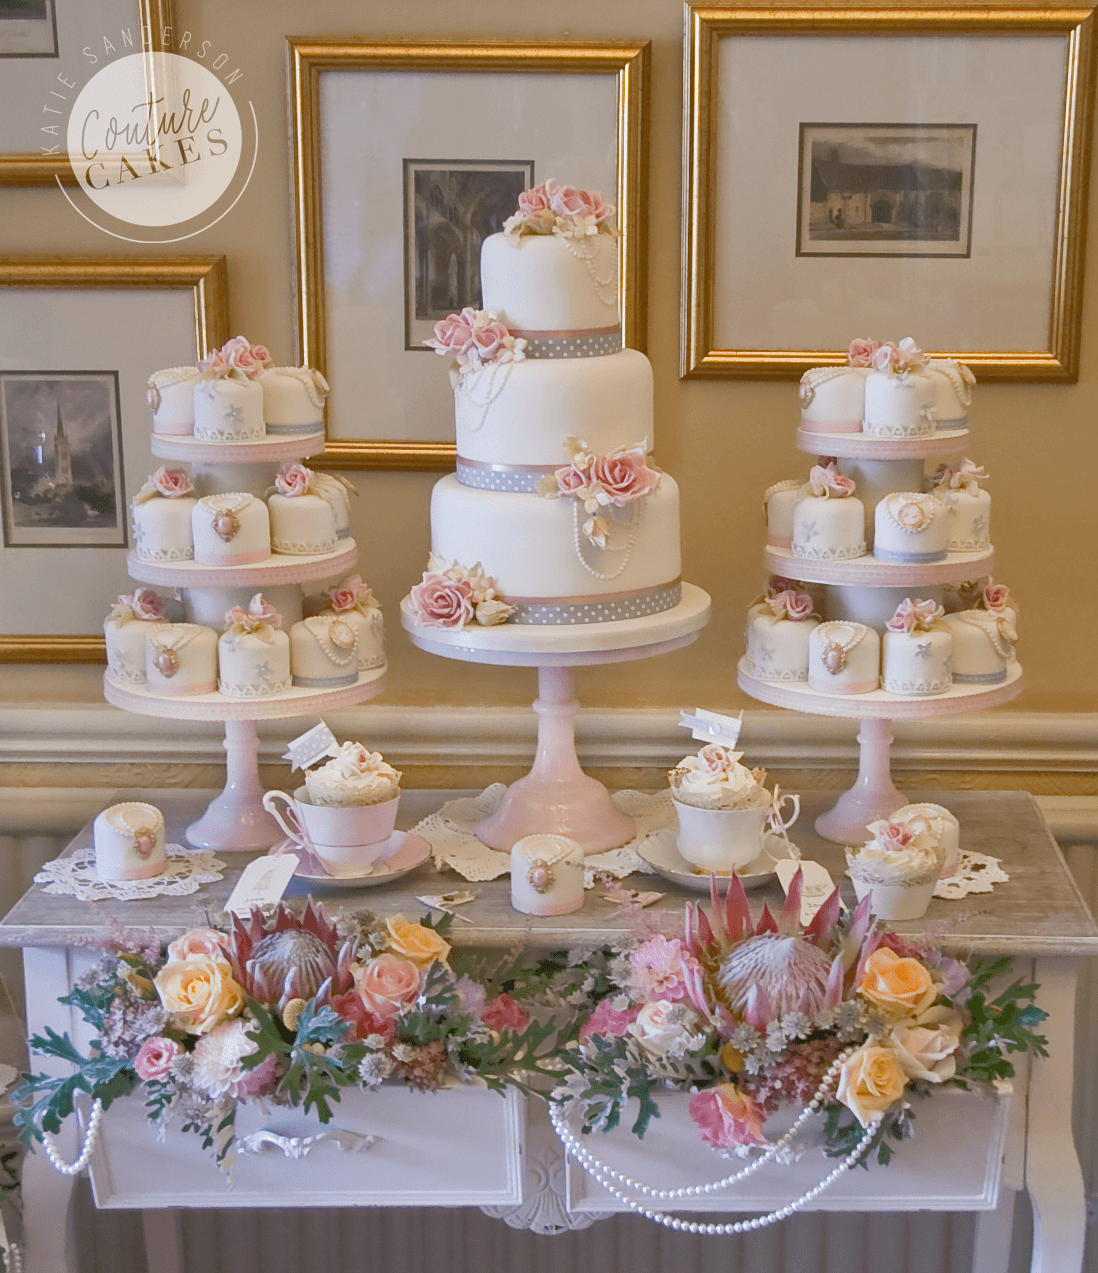 Tiered Cake serves 70 portions, Price £545, plus £420 for 40 mini cakes & tiered stands